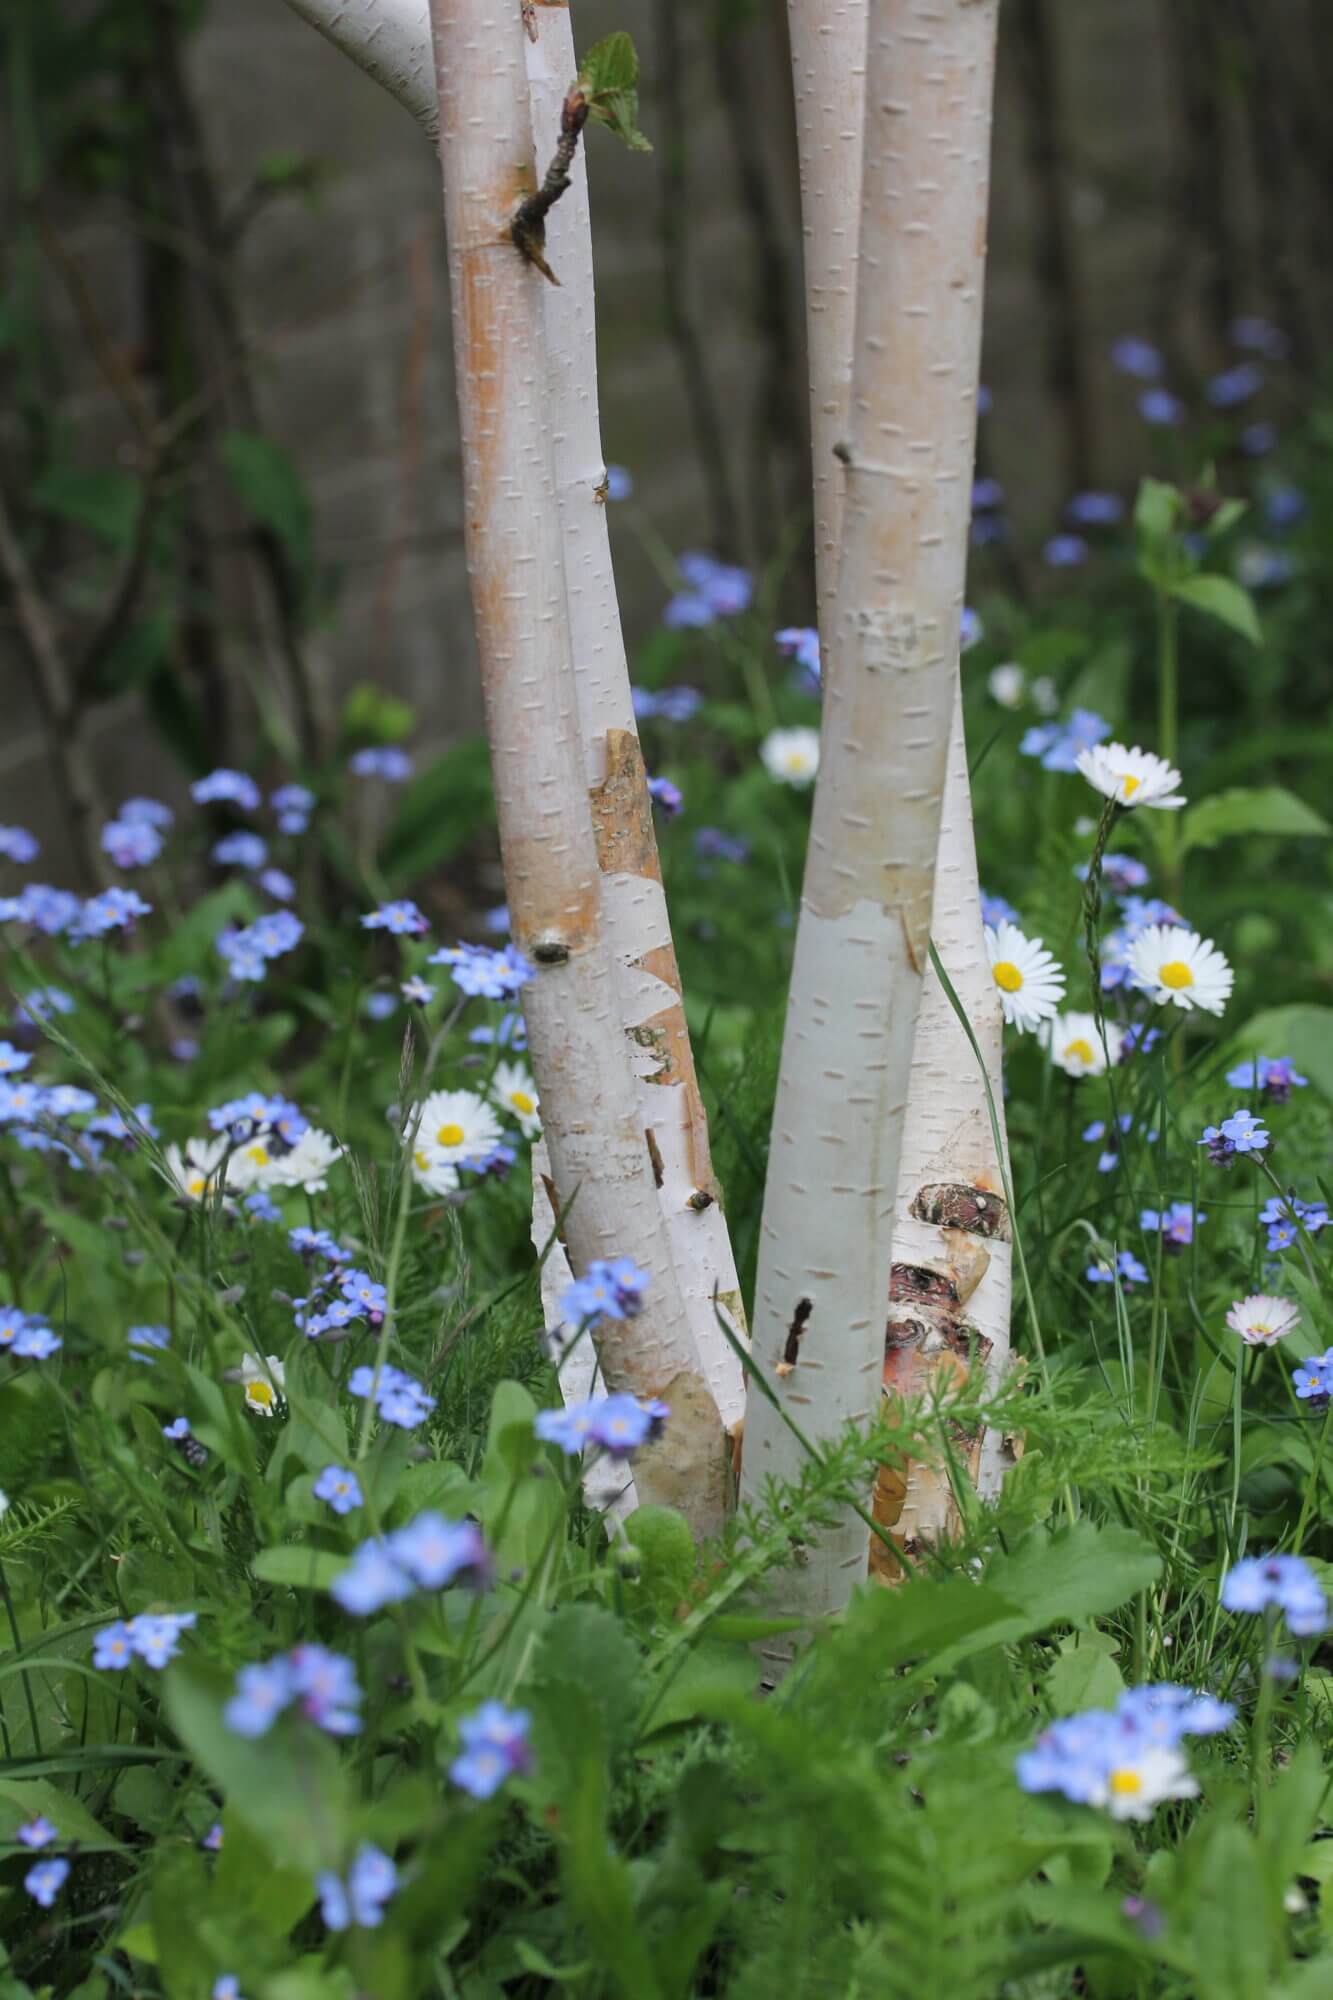 Forget me nots growing under paper birch tree